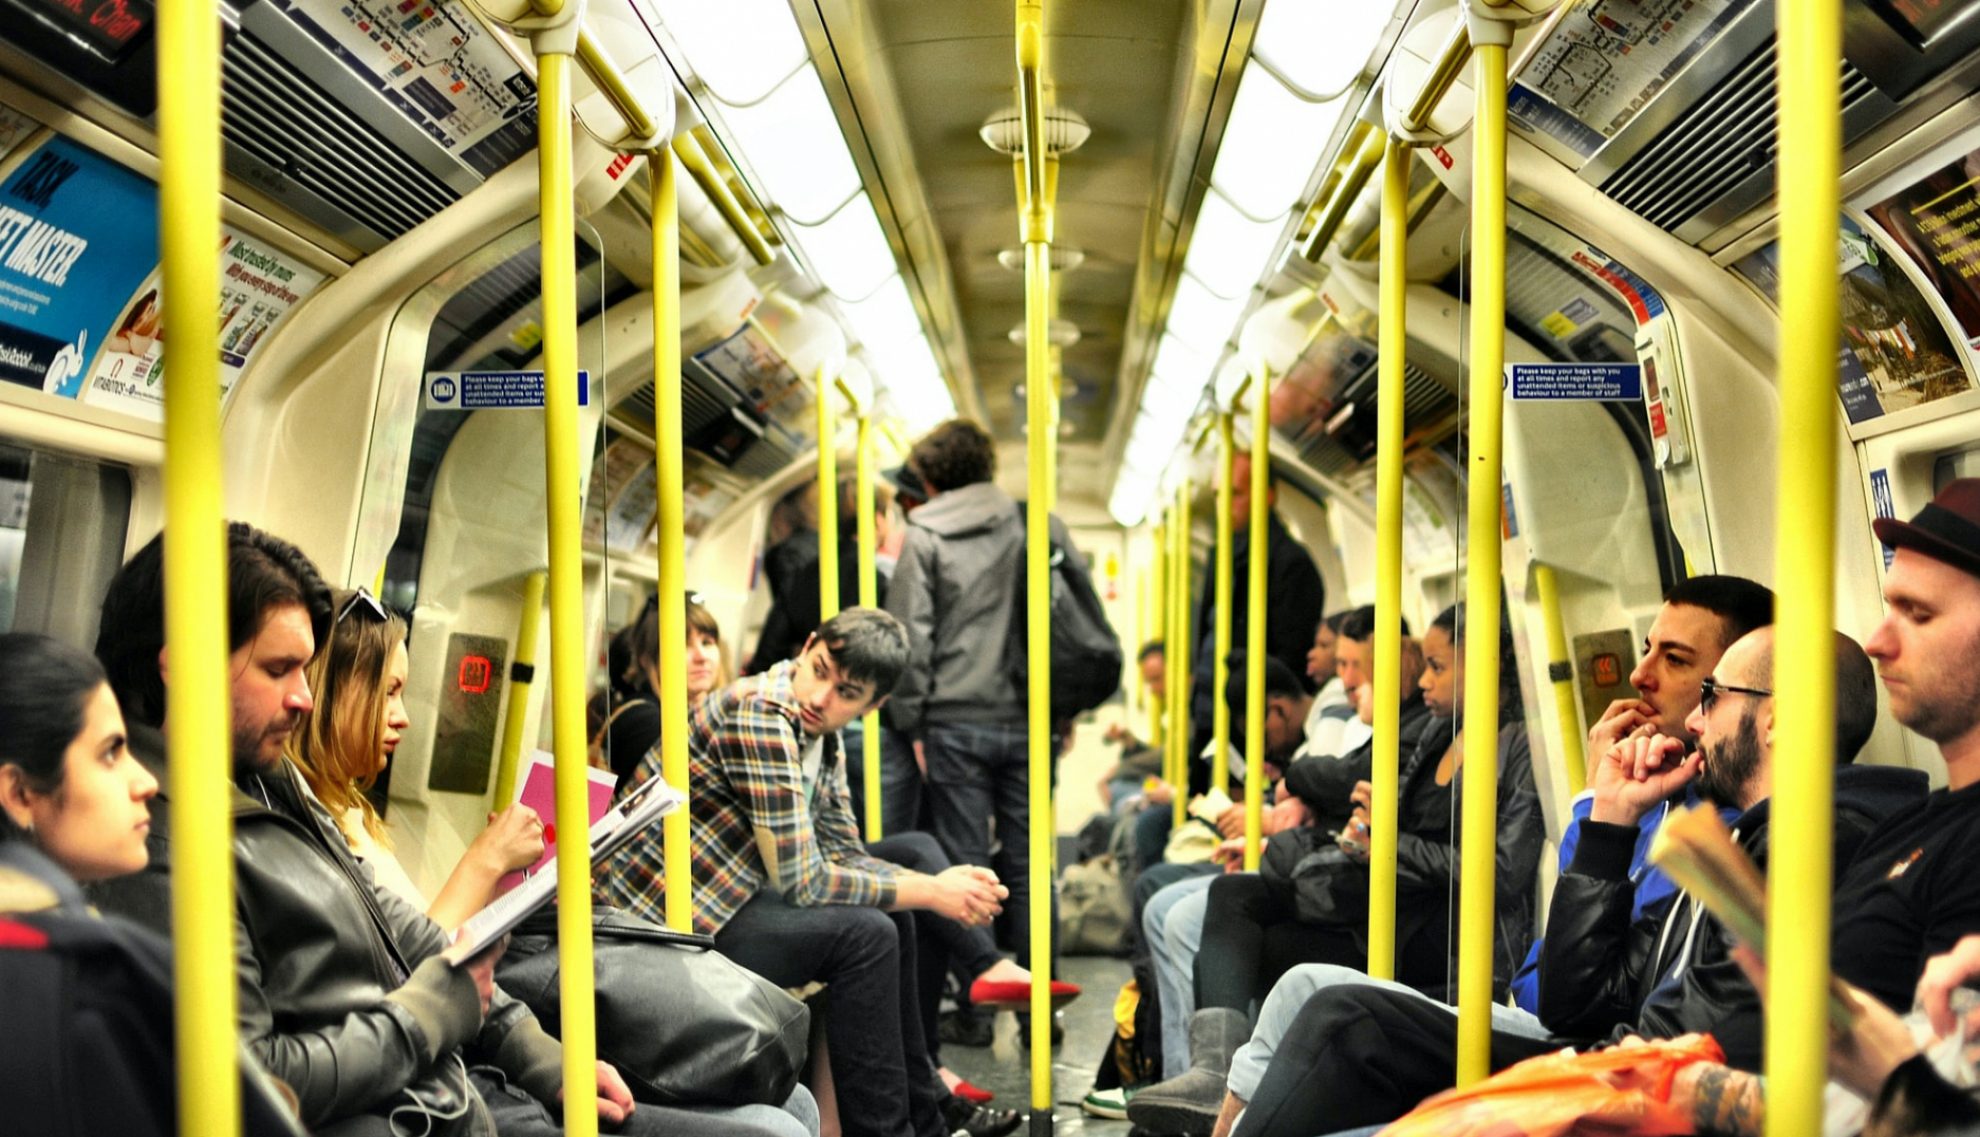 A busy London Underground tube carriage with yellow poles